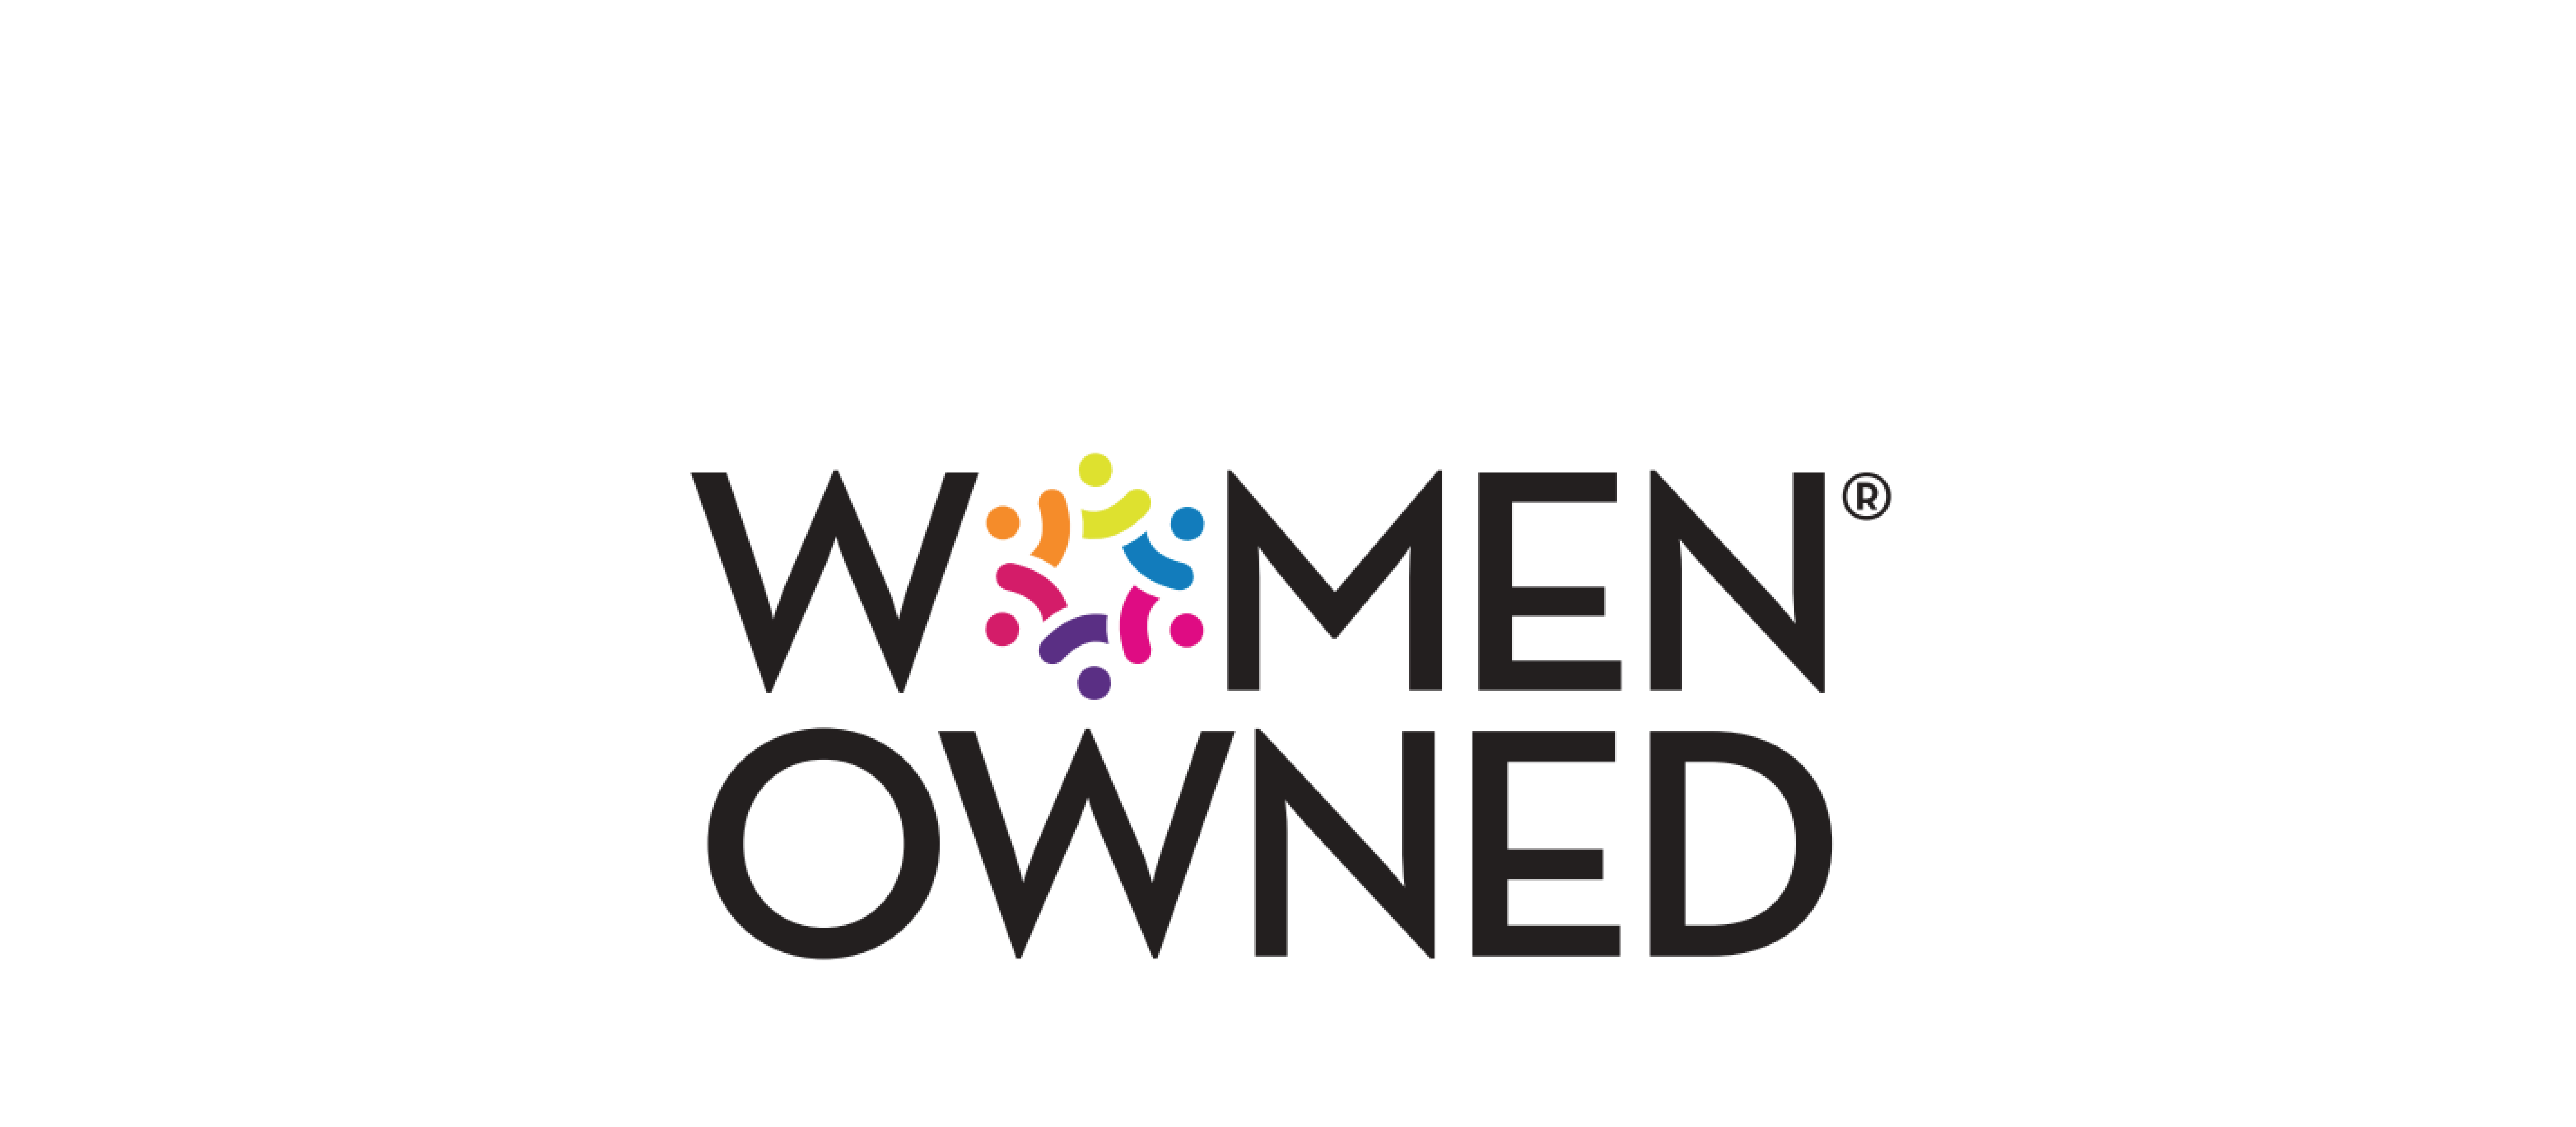 Women Owned@4x